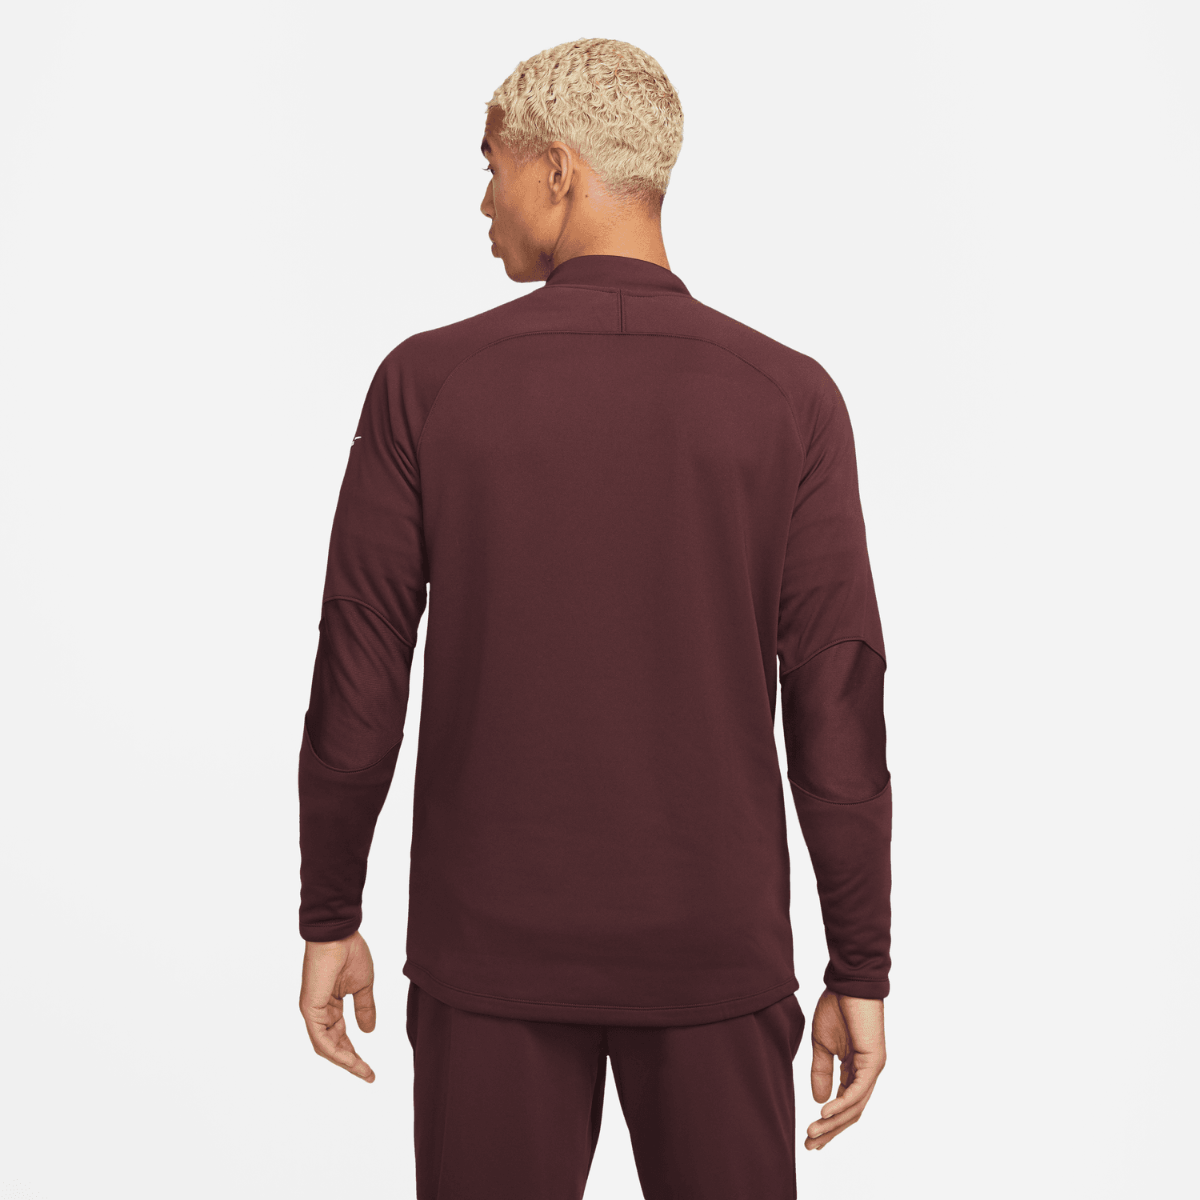 Nike Therma-Fit Academy Training Top - Burgundy